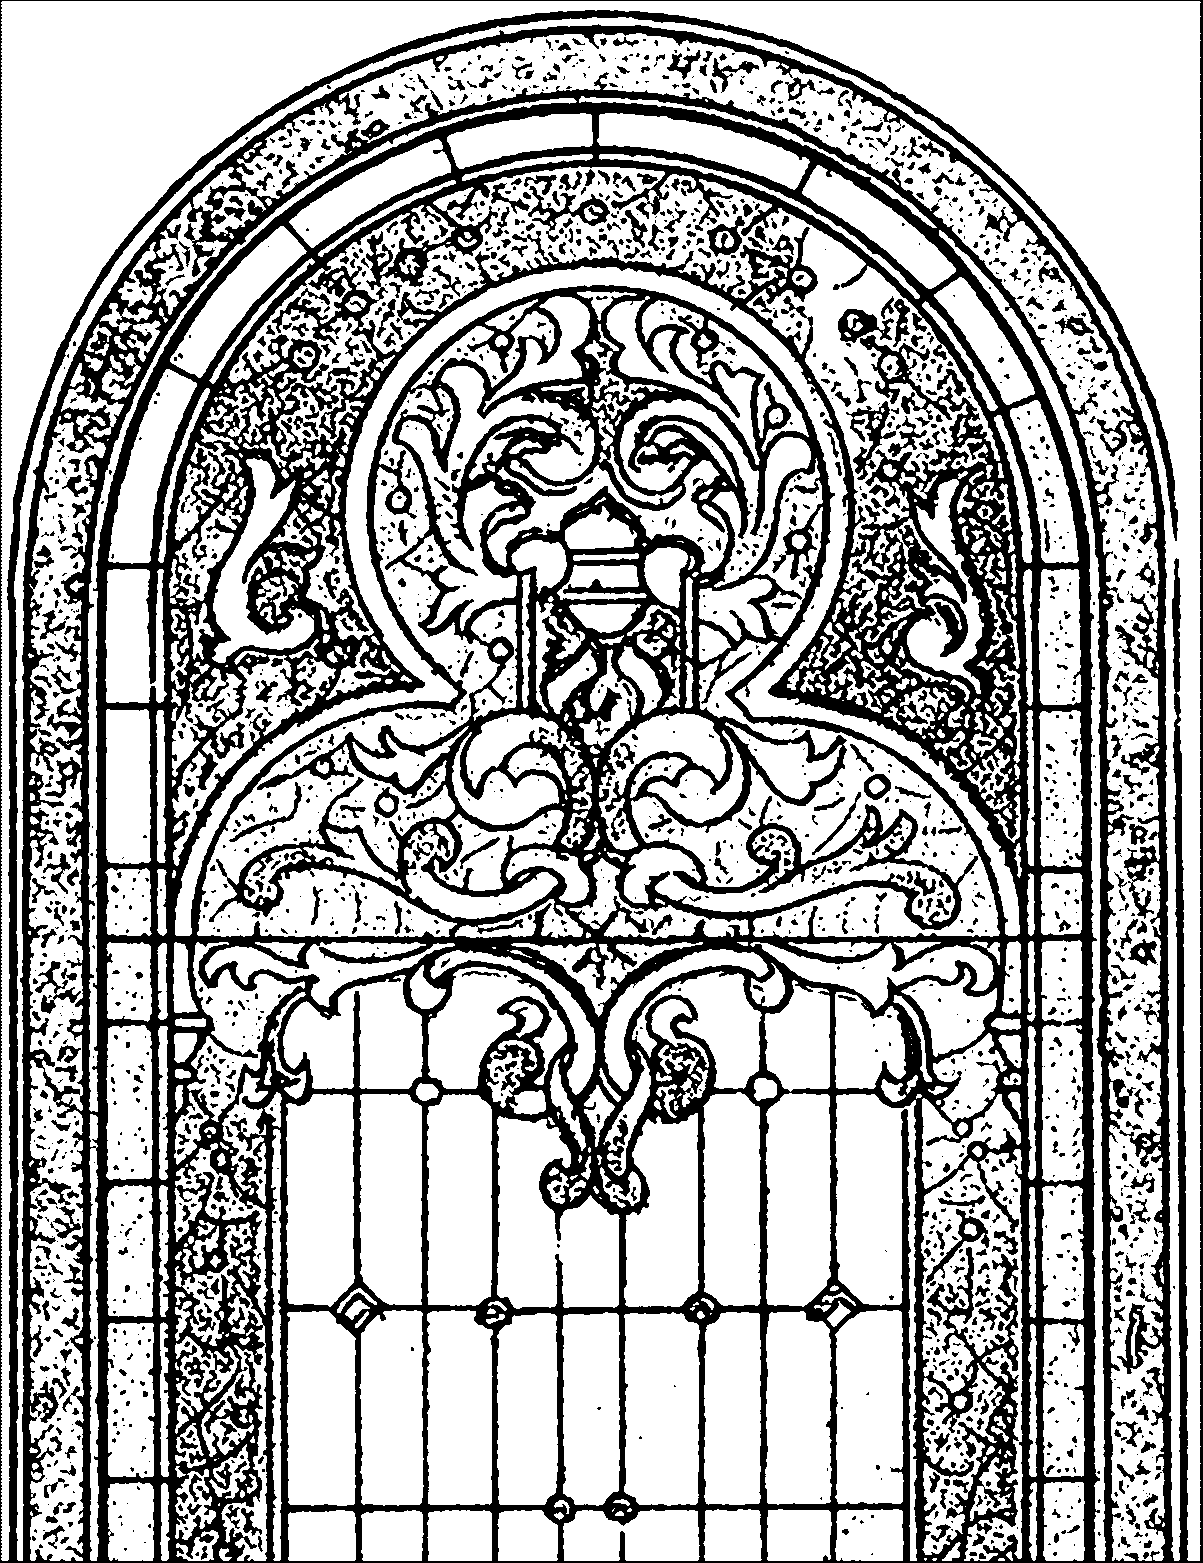 Coloring Pages Of Church Windows - High Quality Coloring Pages